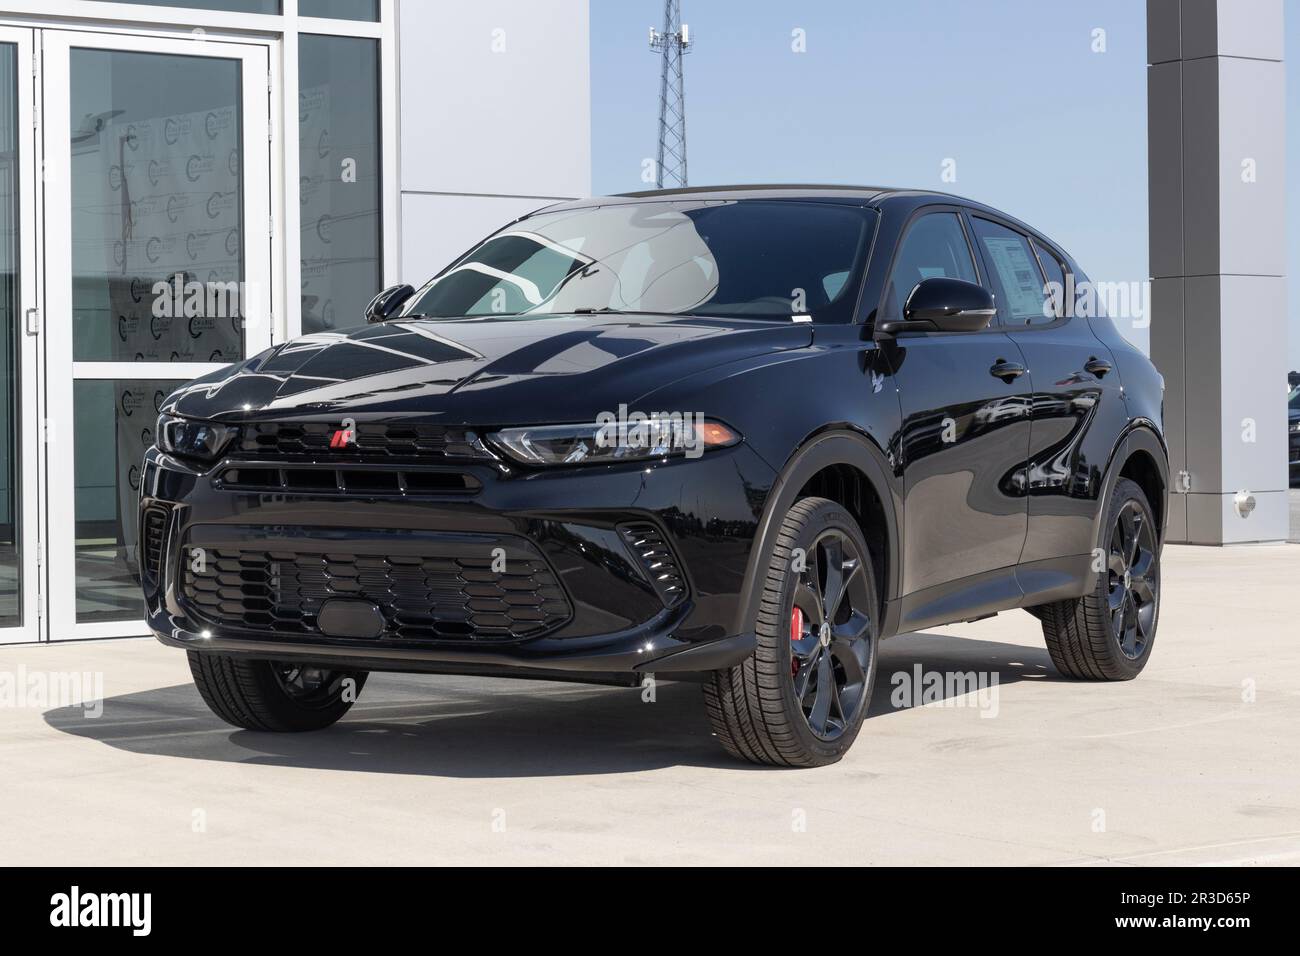 Tipton - Circa May 2023: Dodge Hornet display at a dealership. Dodge offers the Hornet in R/T, GT, and Plus models. Stock Photo